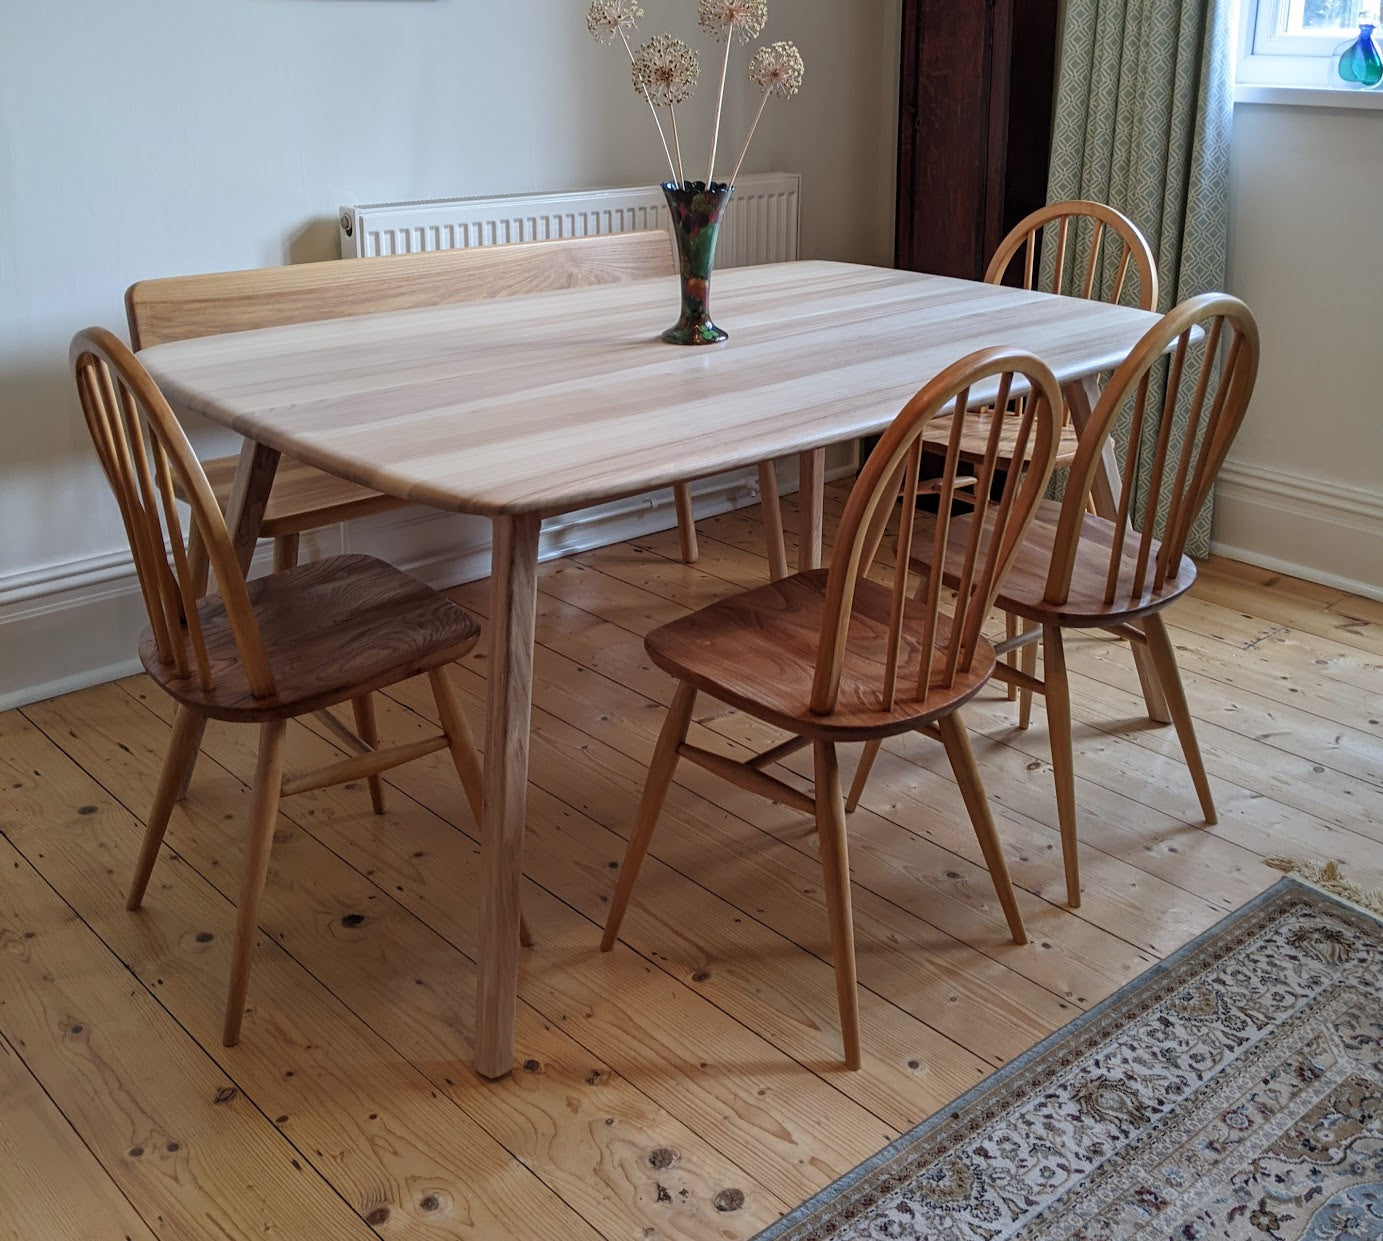 Bespoke Ash Table Bench and Restored Ercol Chair Set